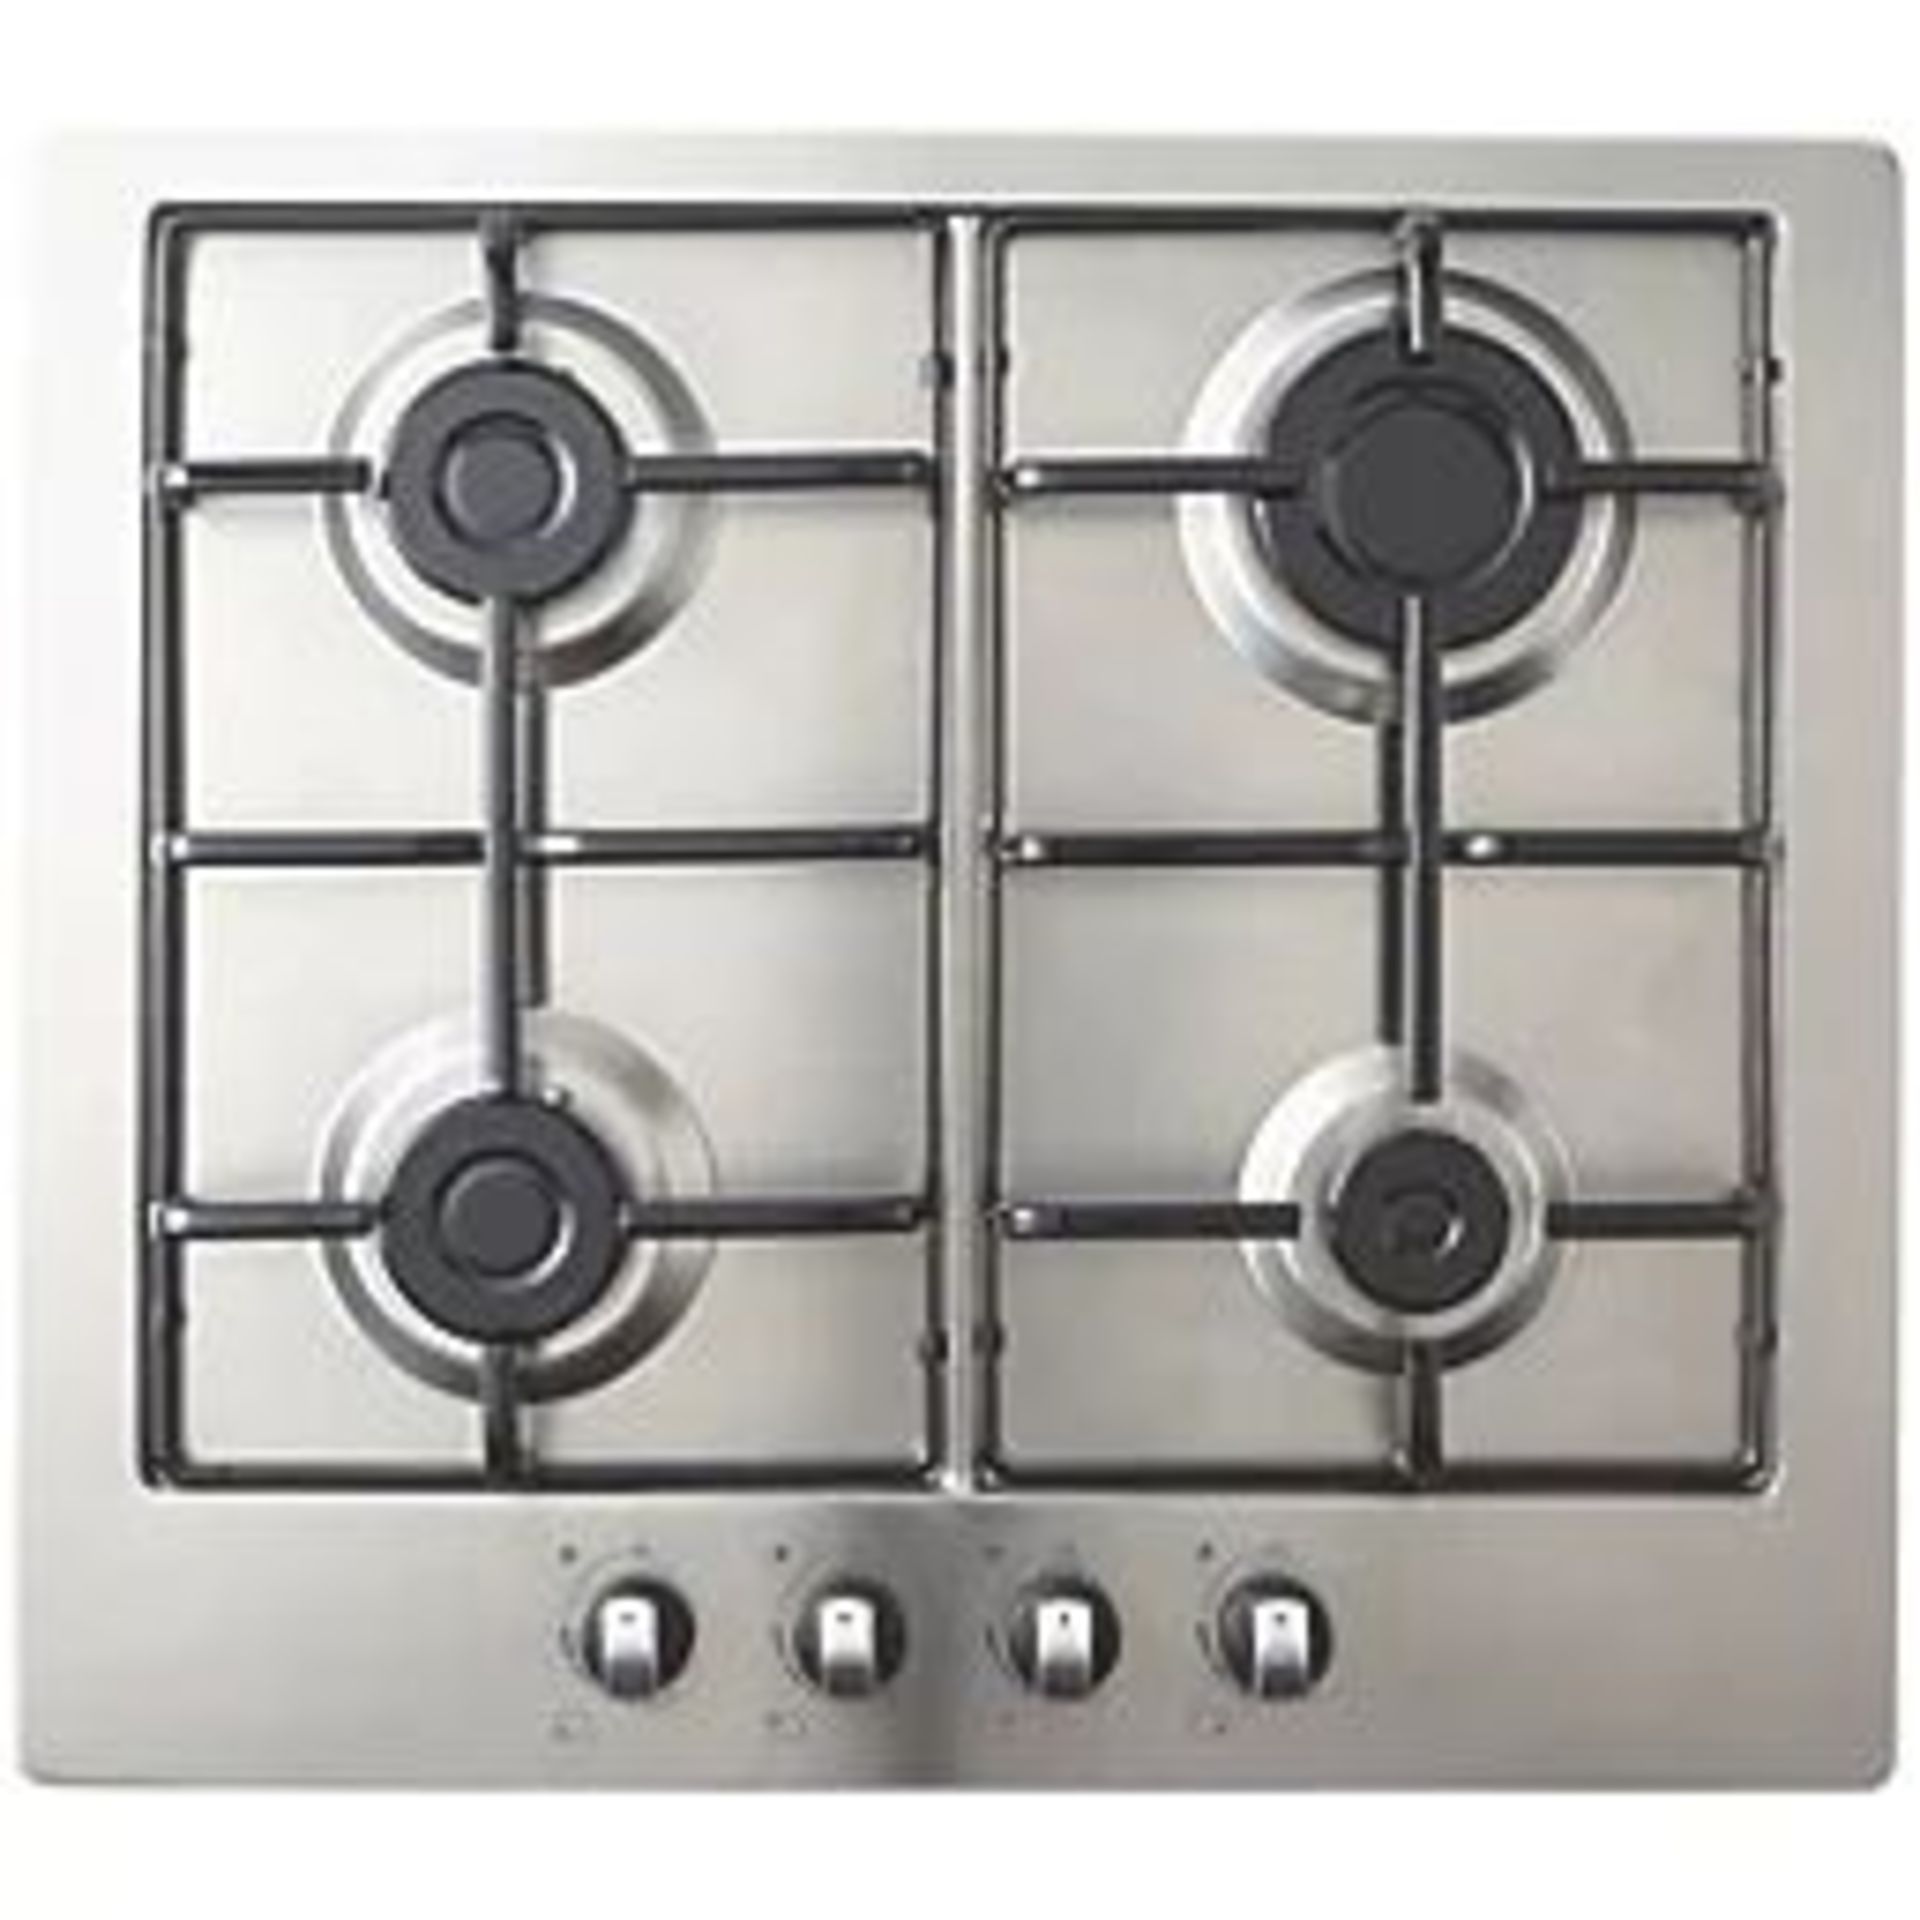 COOKE & LEWIS GAS HOB STAINLESS STEEL 58CM. - R9BW. Stainless steel hob with 4 zones and the